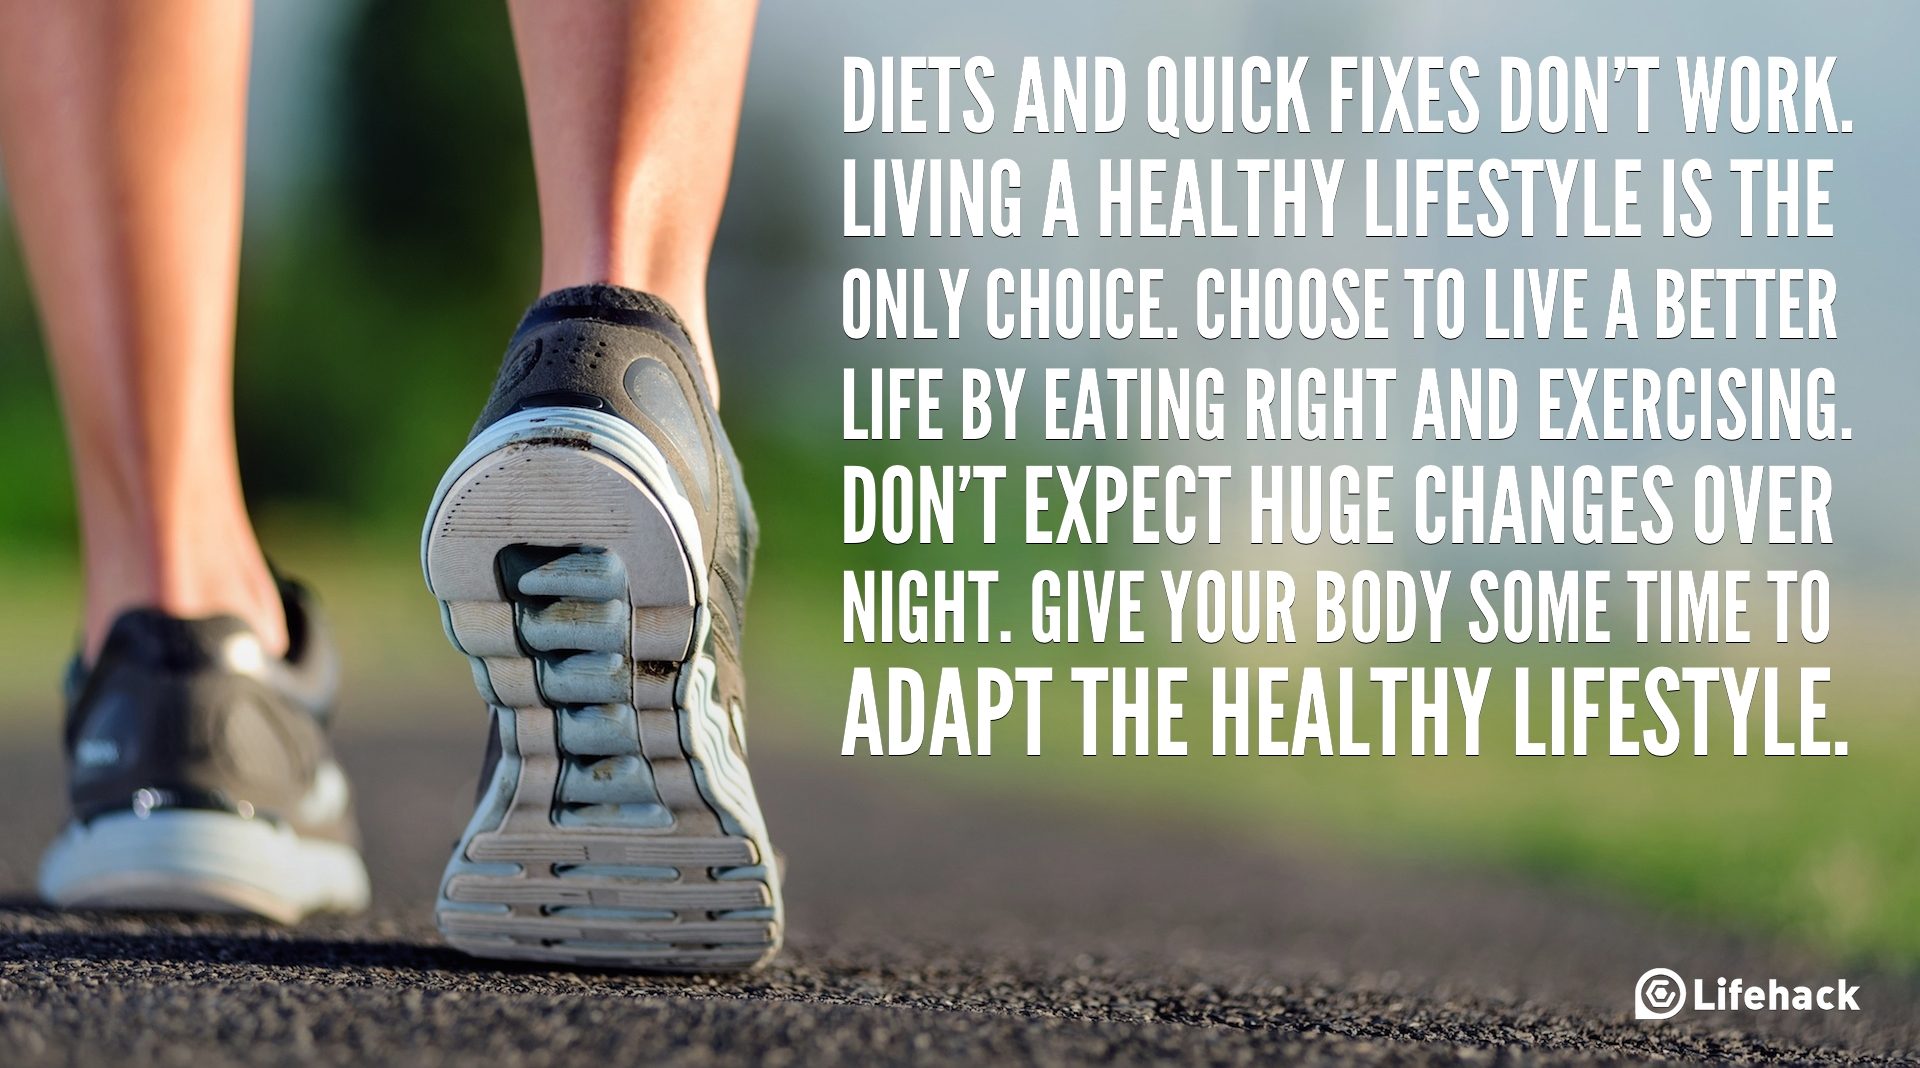 30sec Tip: Diets and Quick Fixes don’t Work